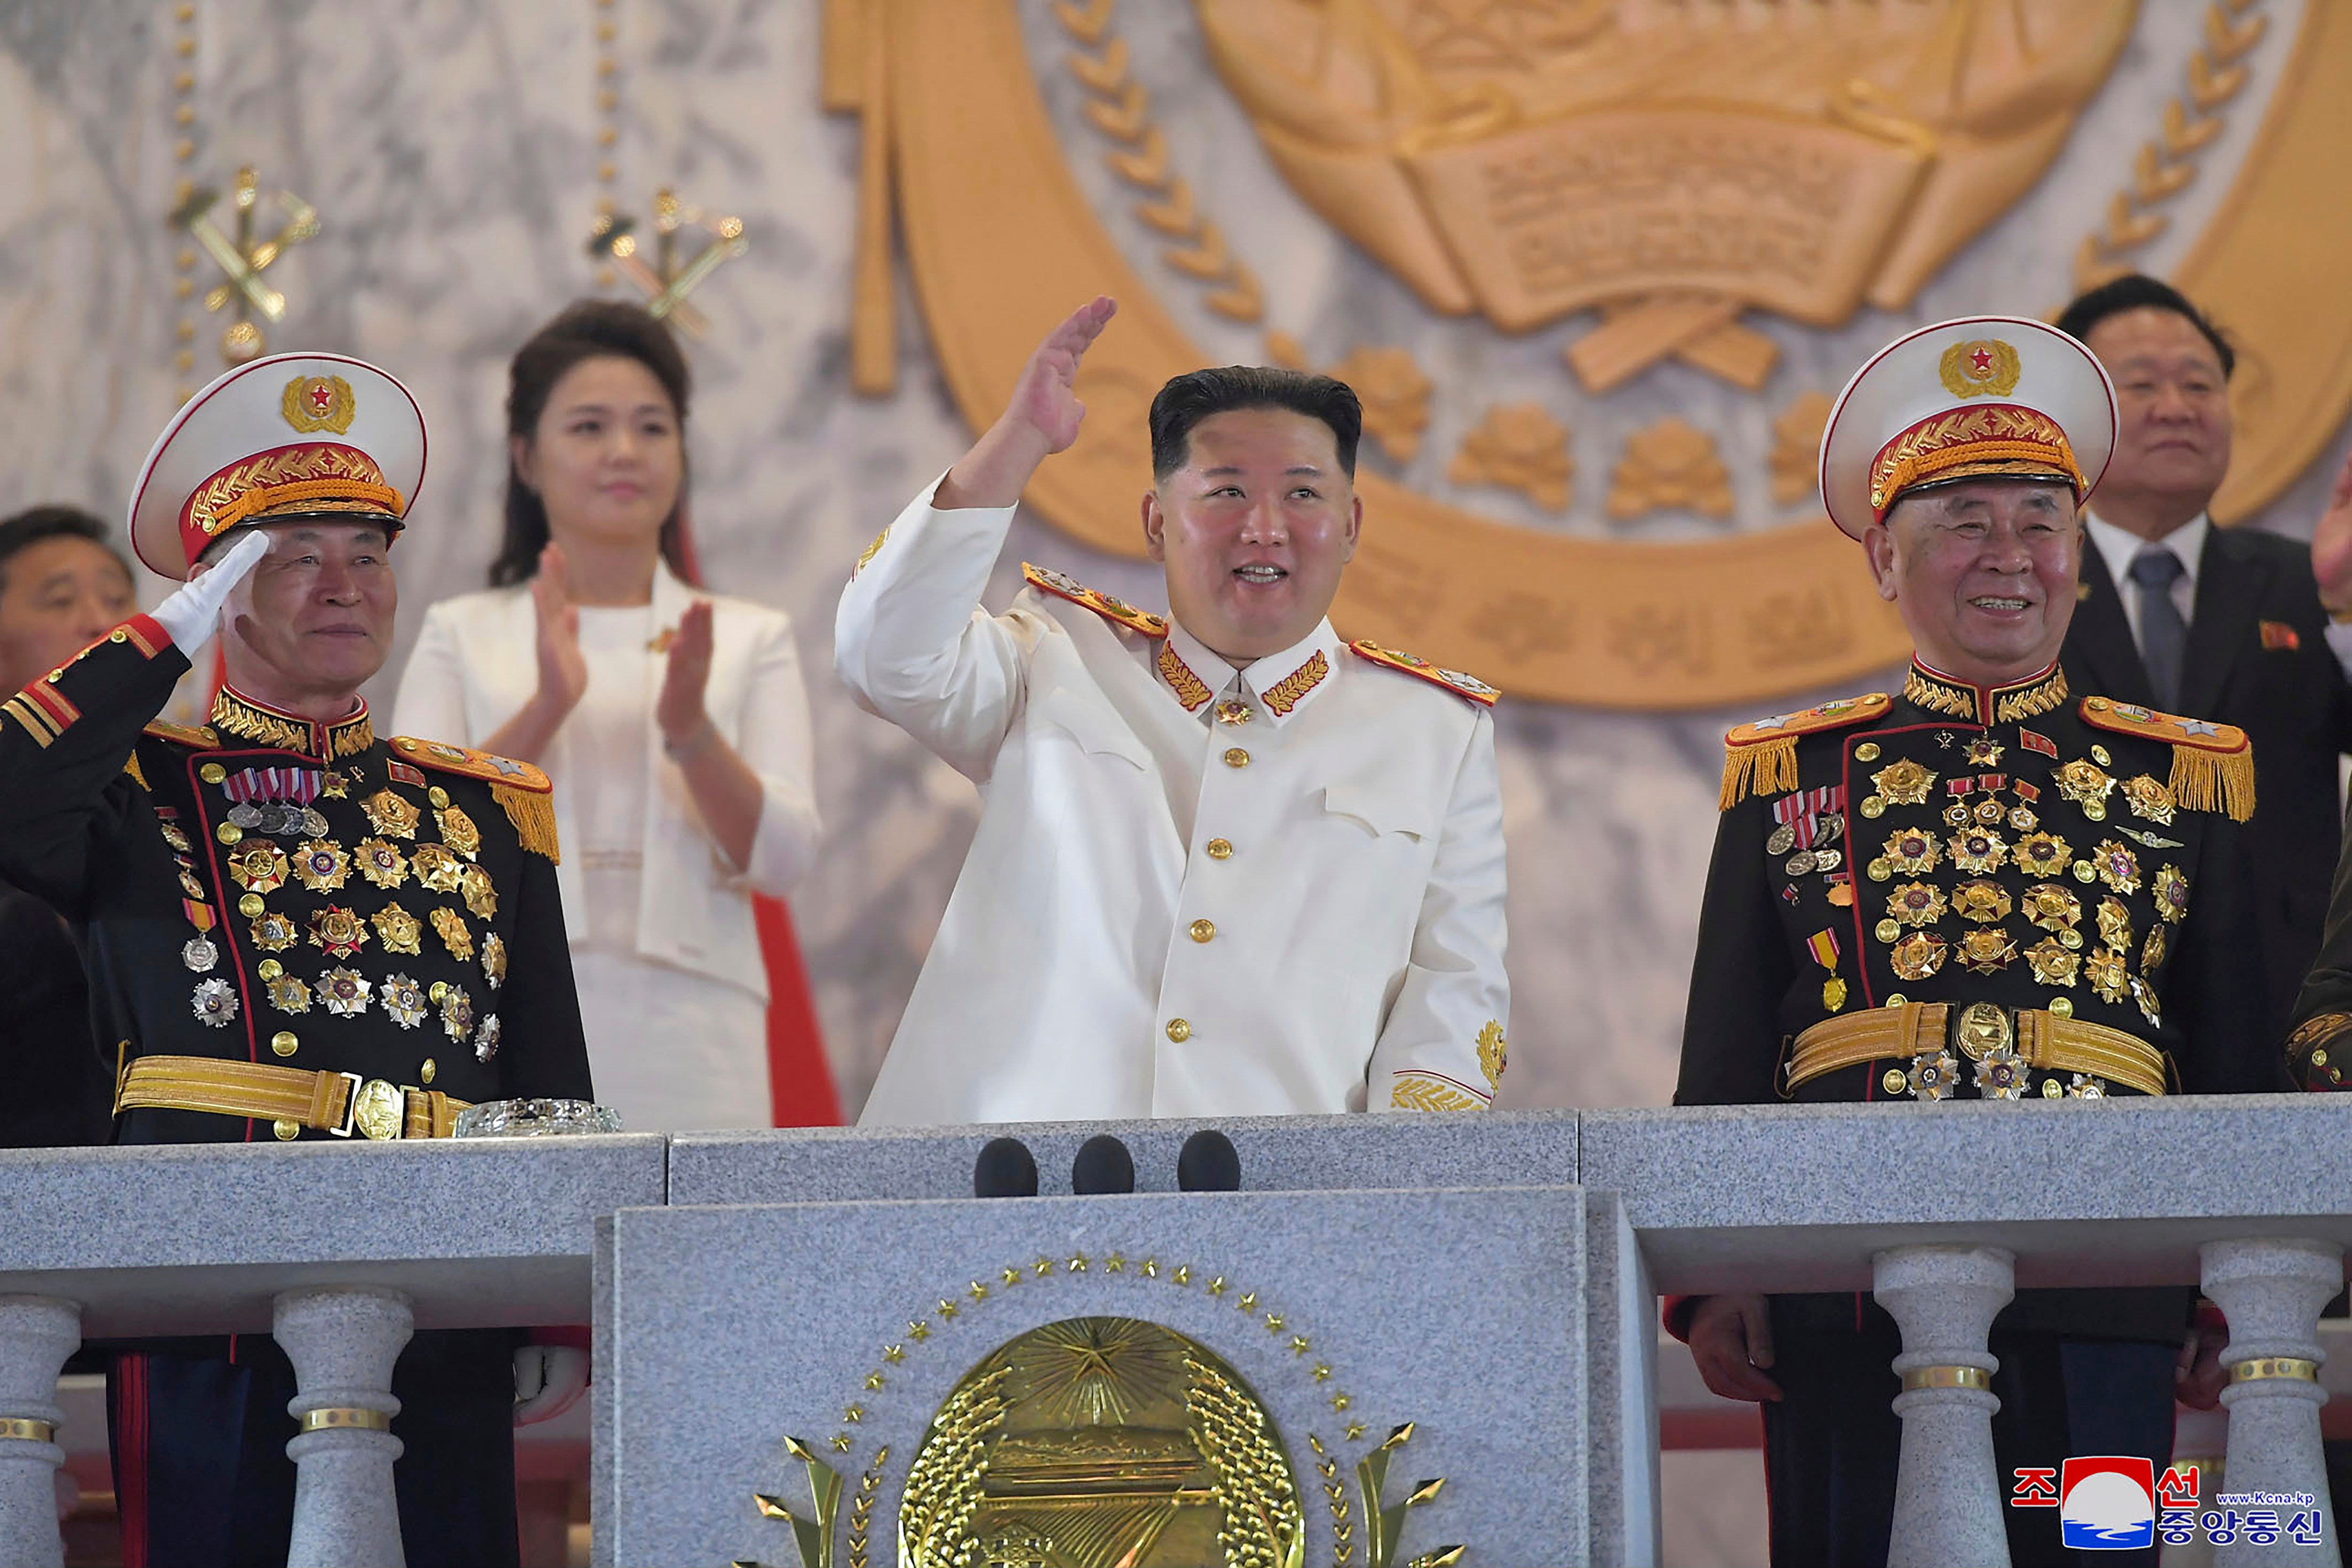 North Korea’s dictator is threatening to increase the nuclear arsenal during the military parade